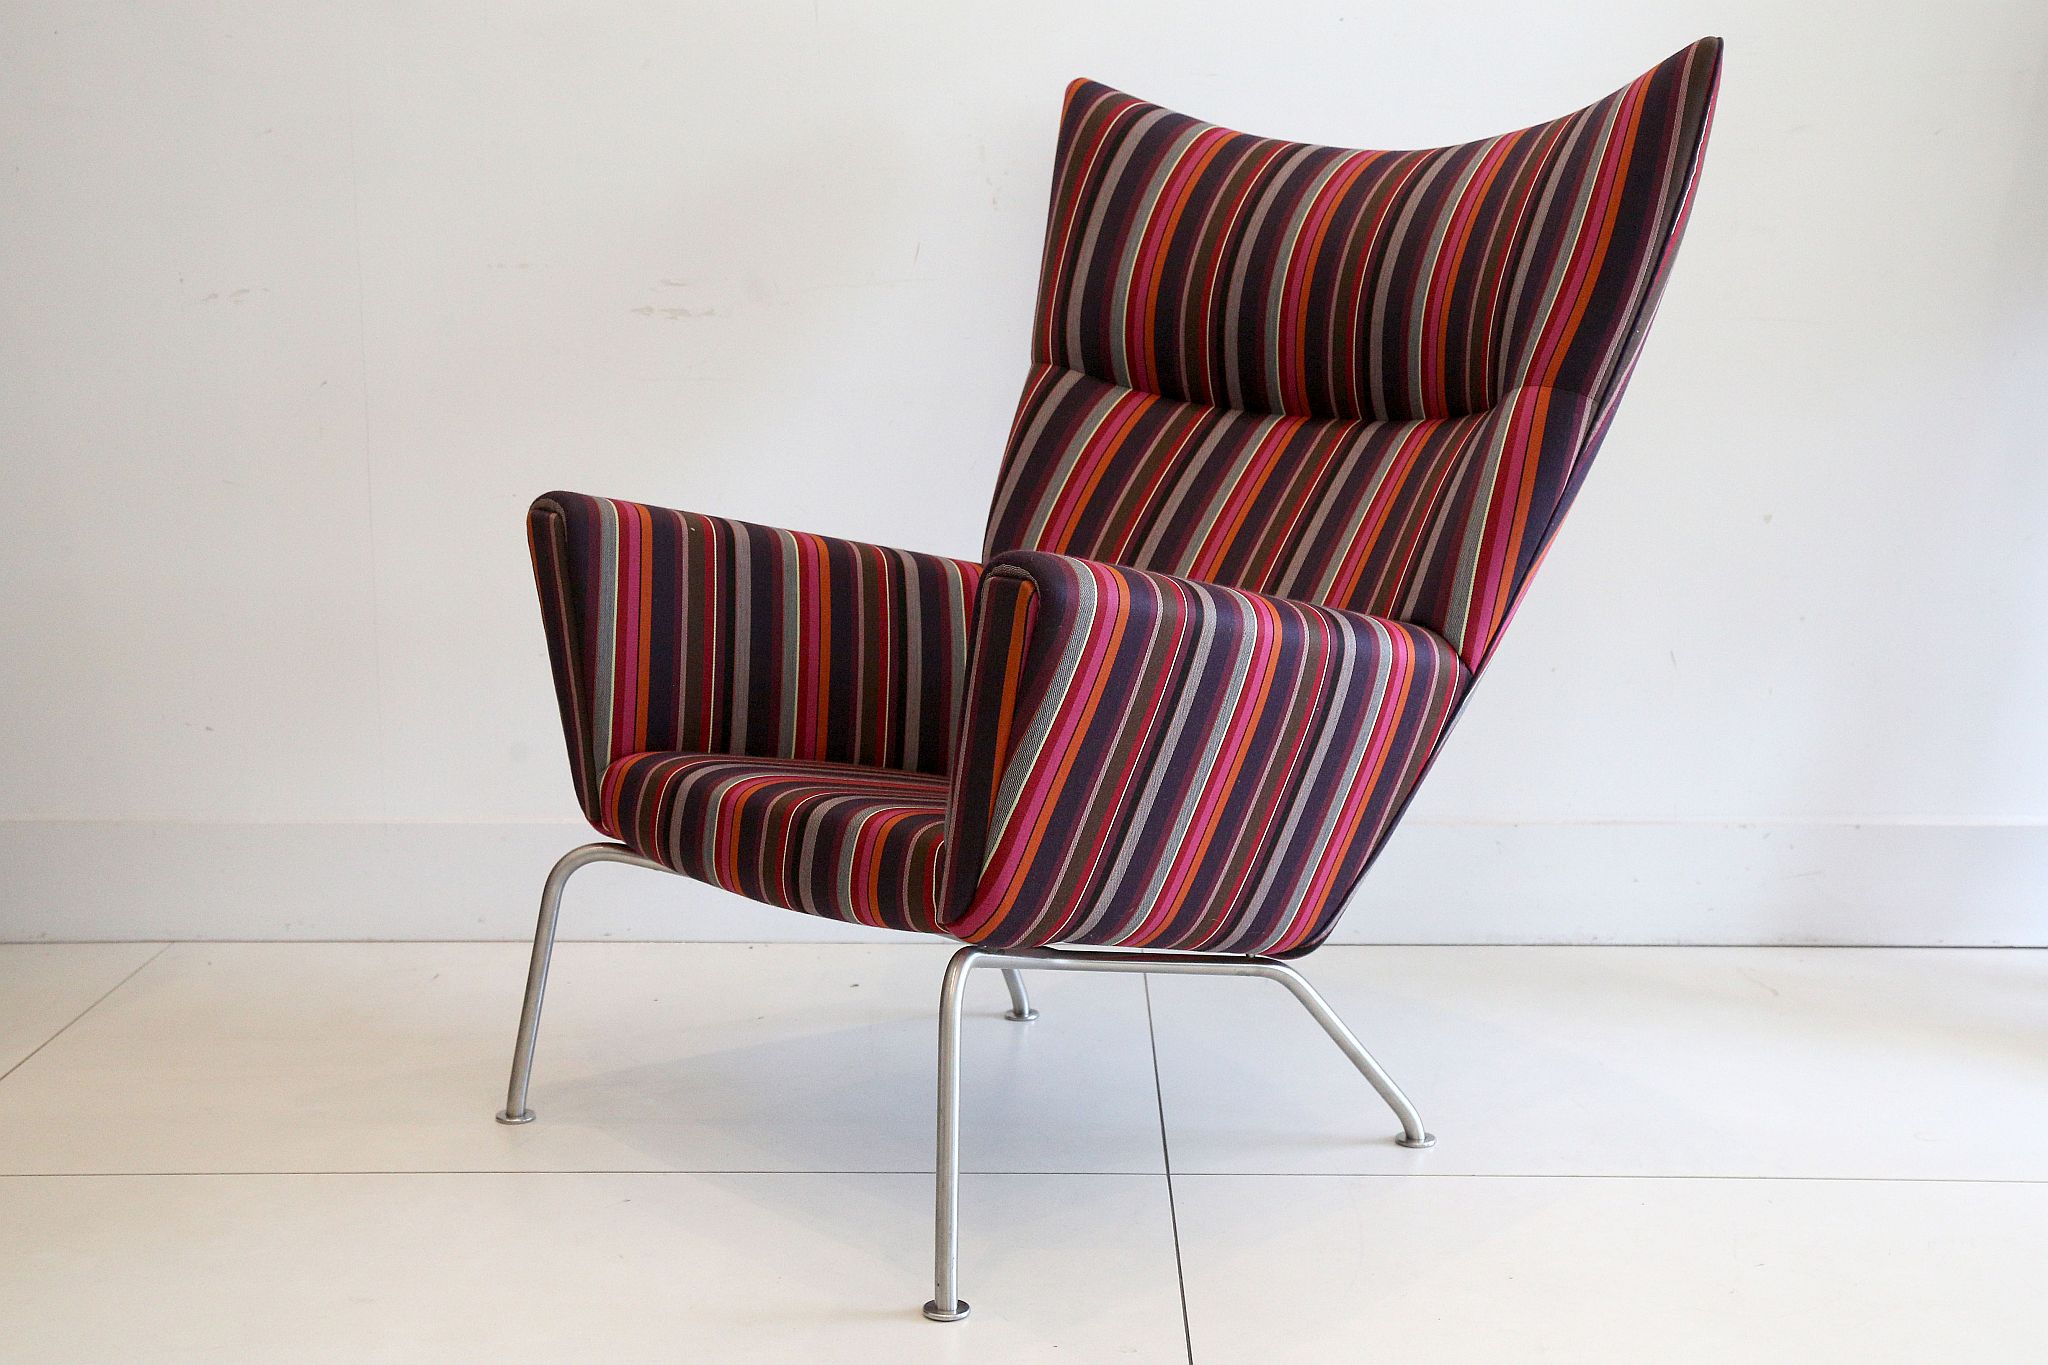 A CH447 WING CHAIR, DESIGNED BY HANS WEGNER, MANUFACTURED BY CARL HANSEN & SON, DENMARK, in Paul